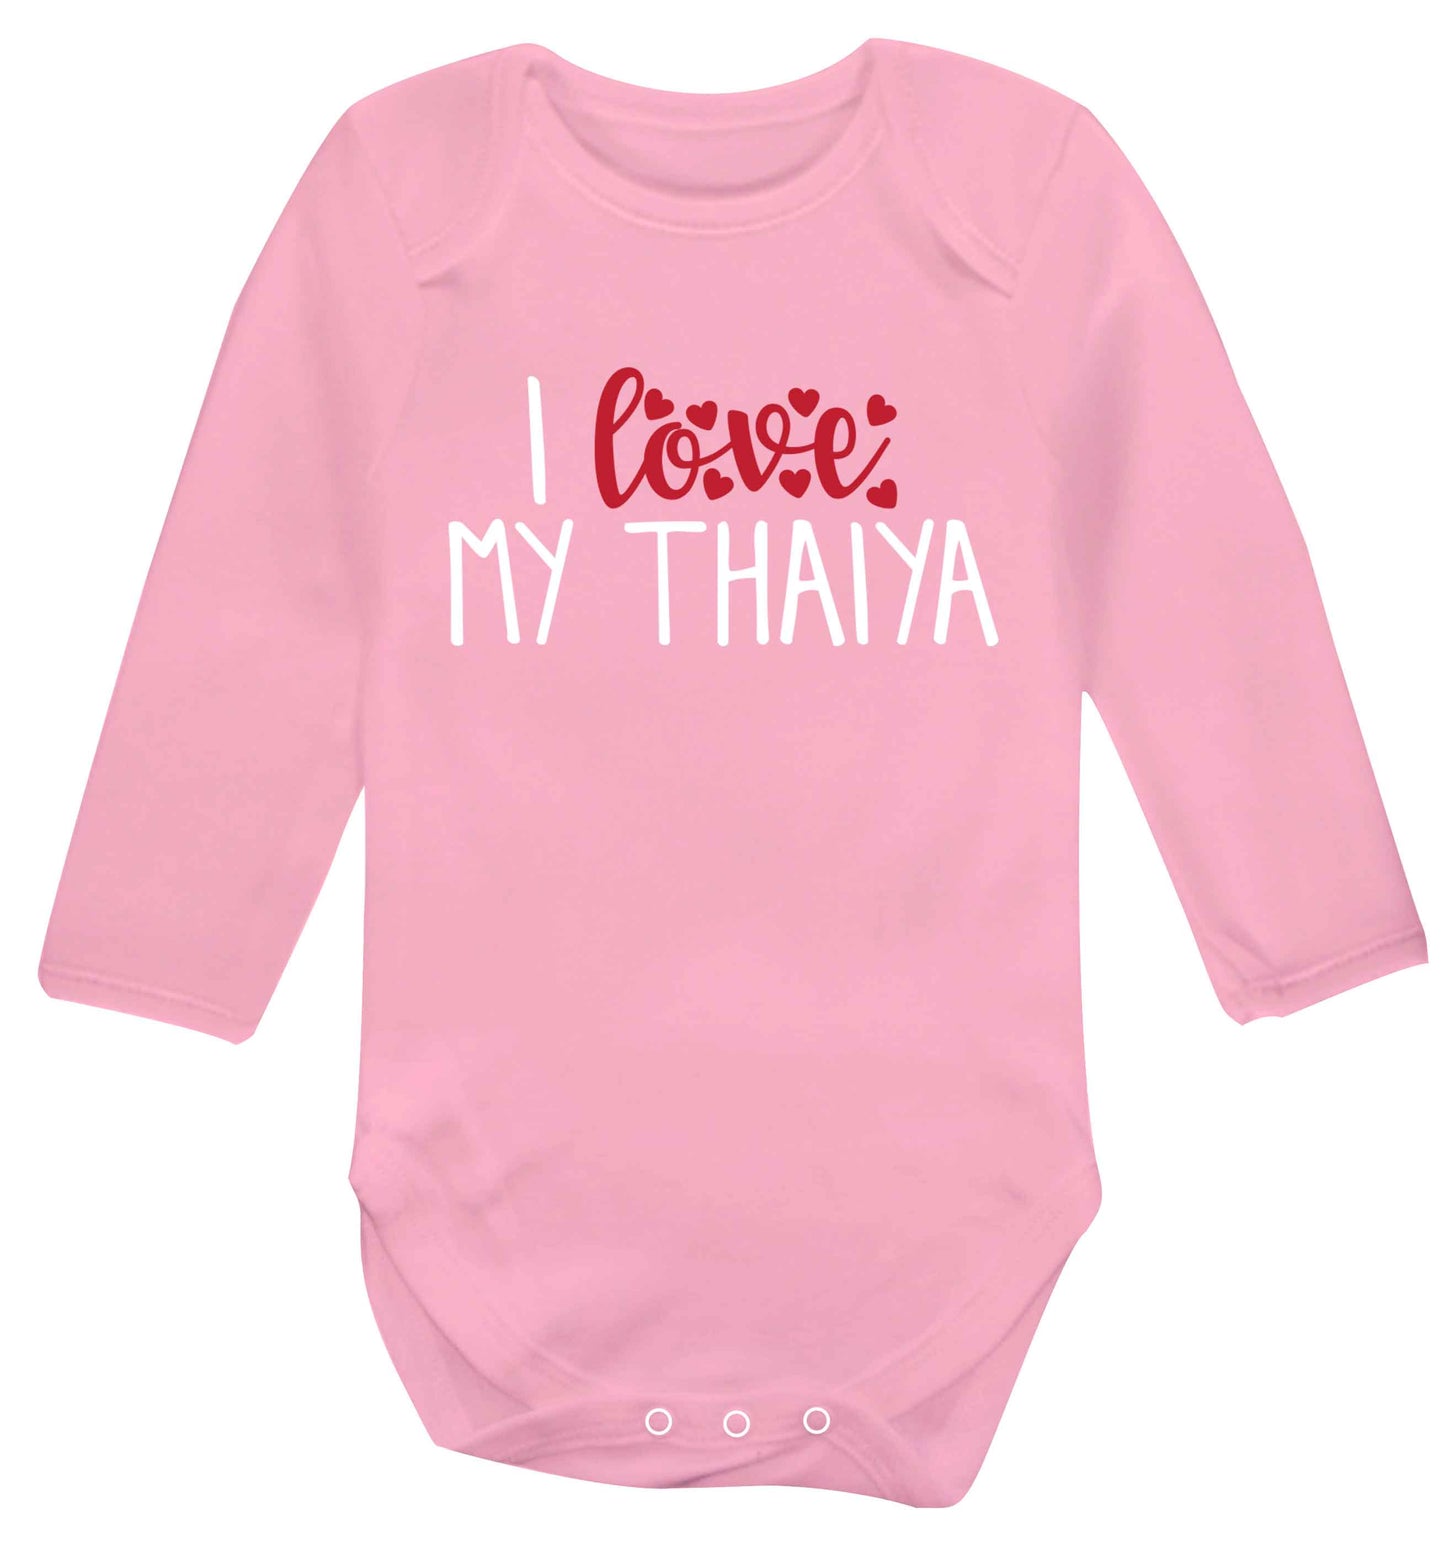 I love my thaiya Baby Vest long sleeved pale pink 6-12 months